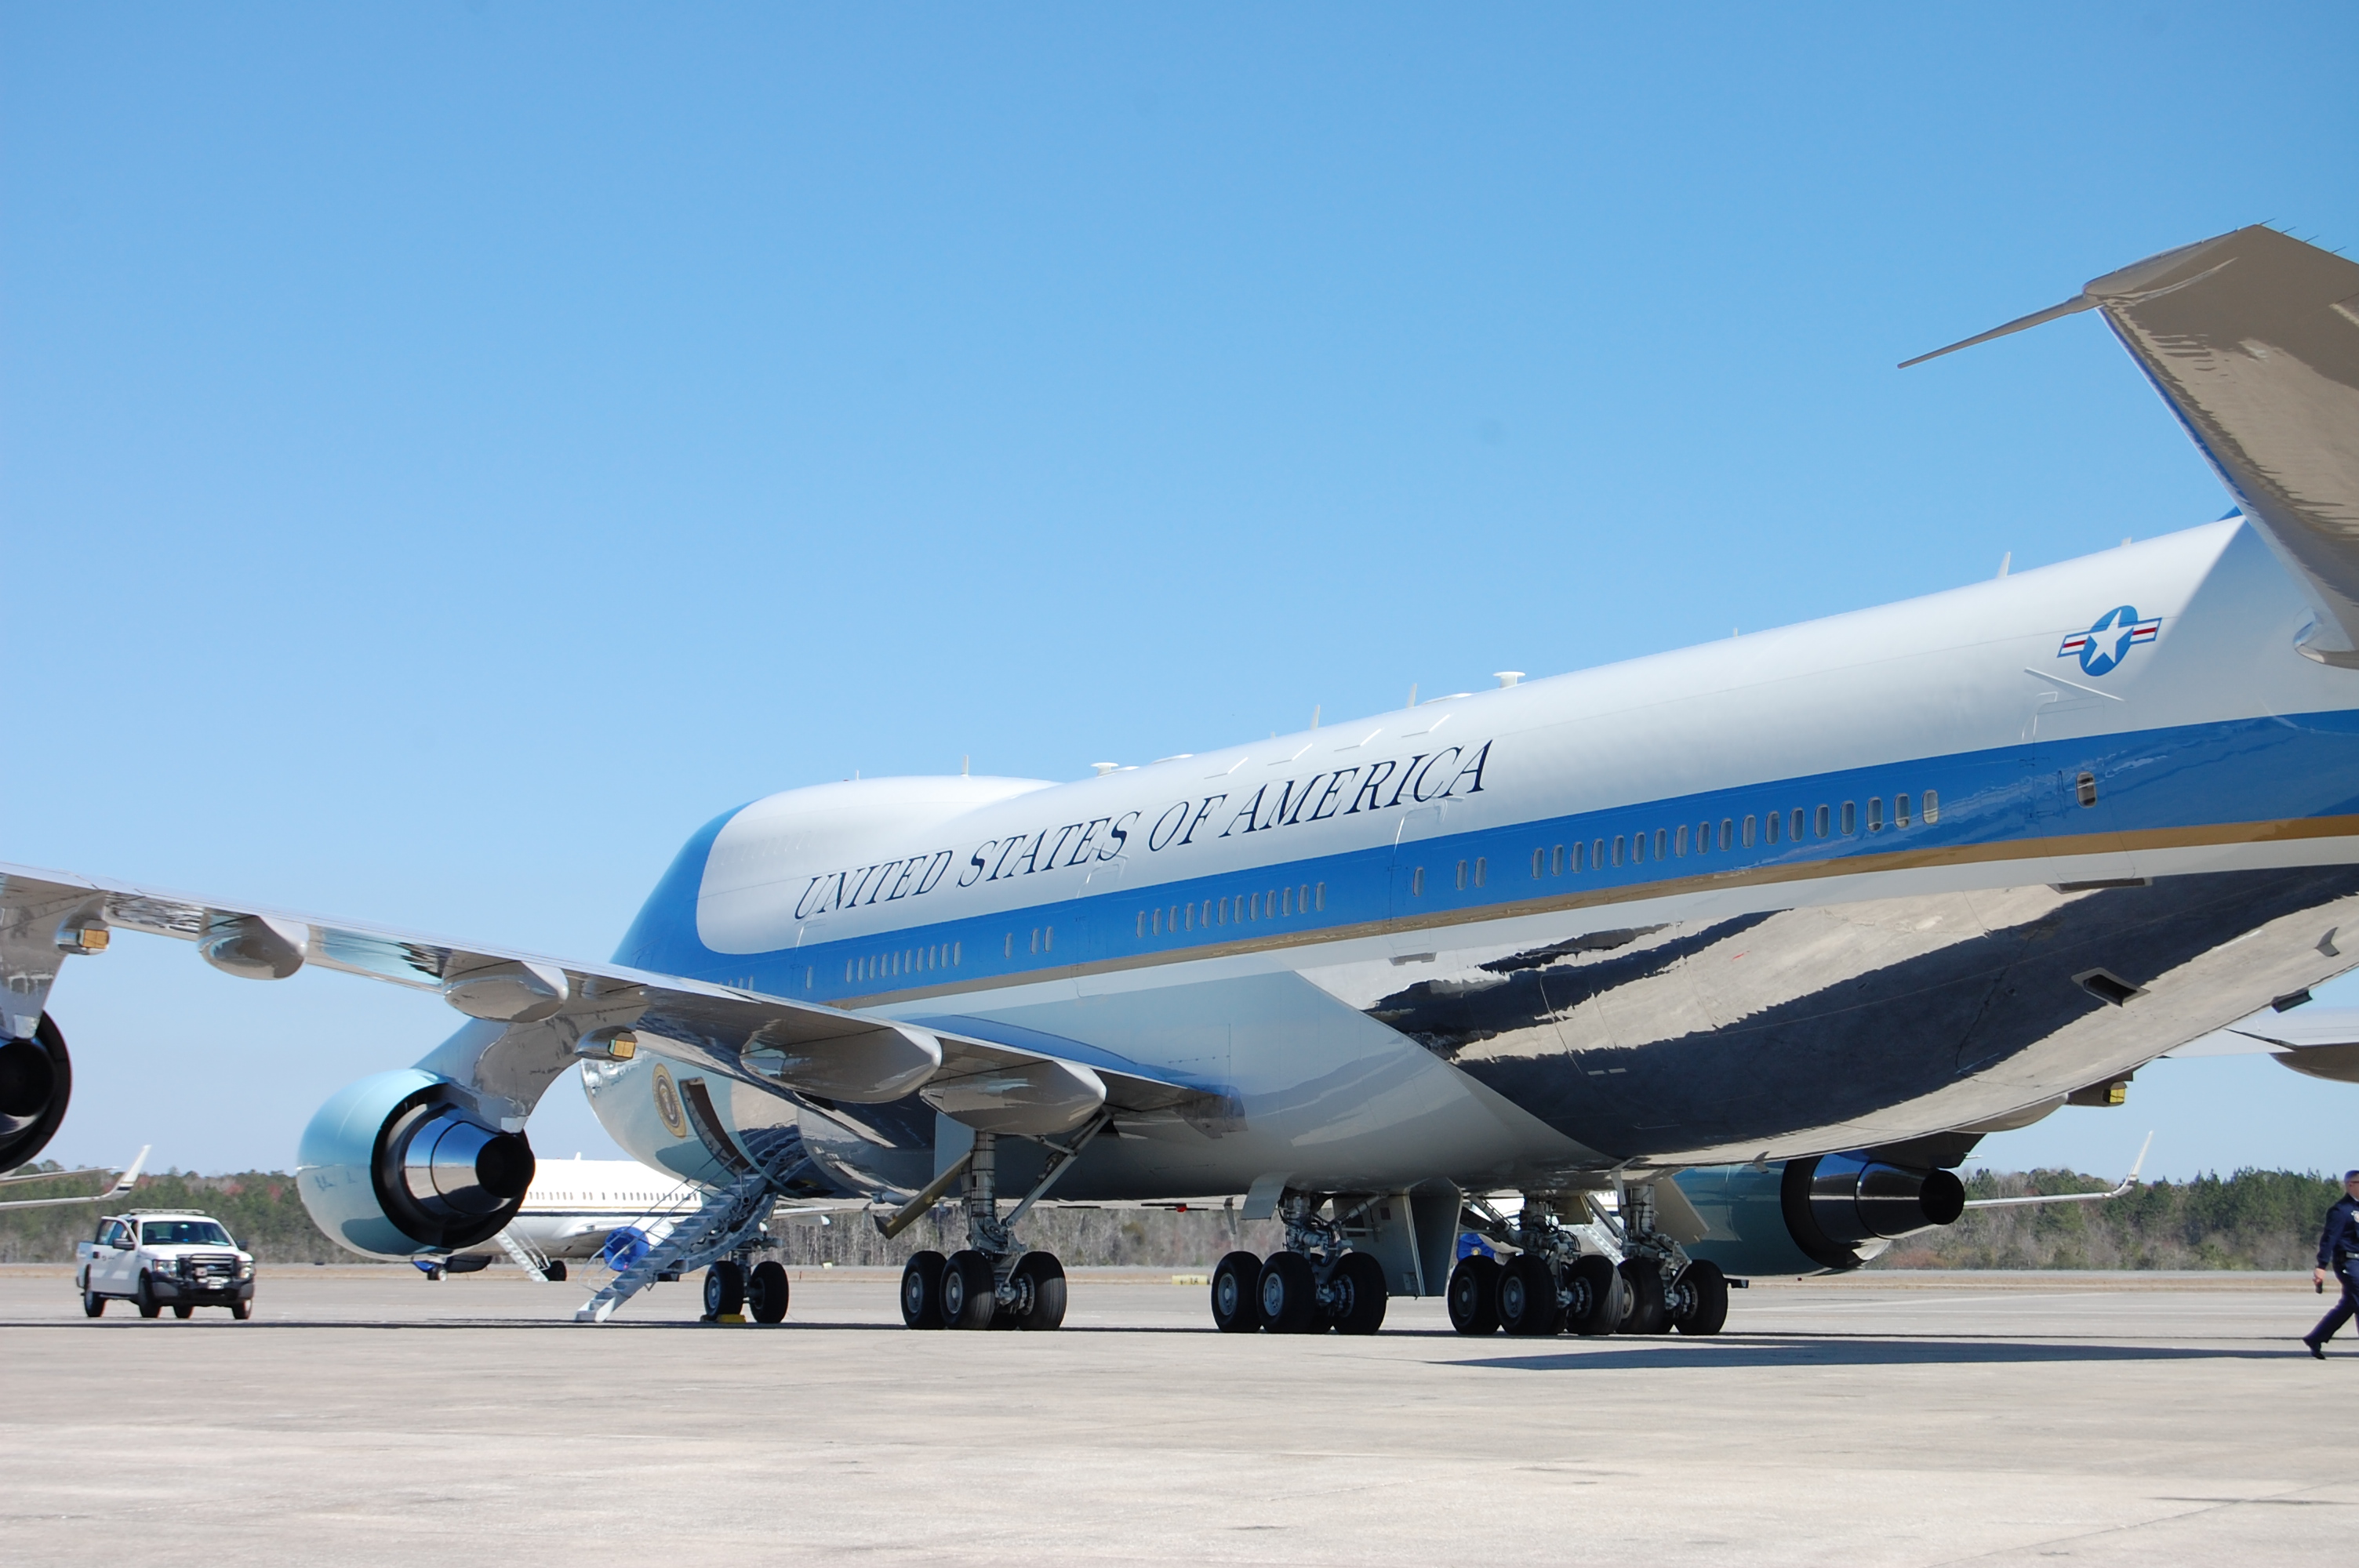 air force one plane